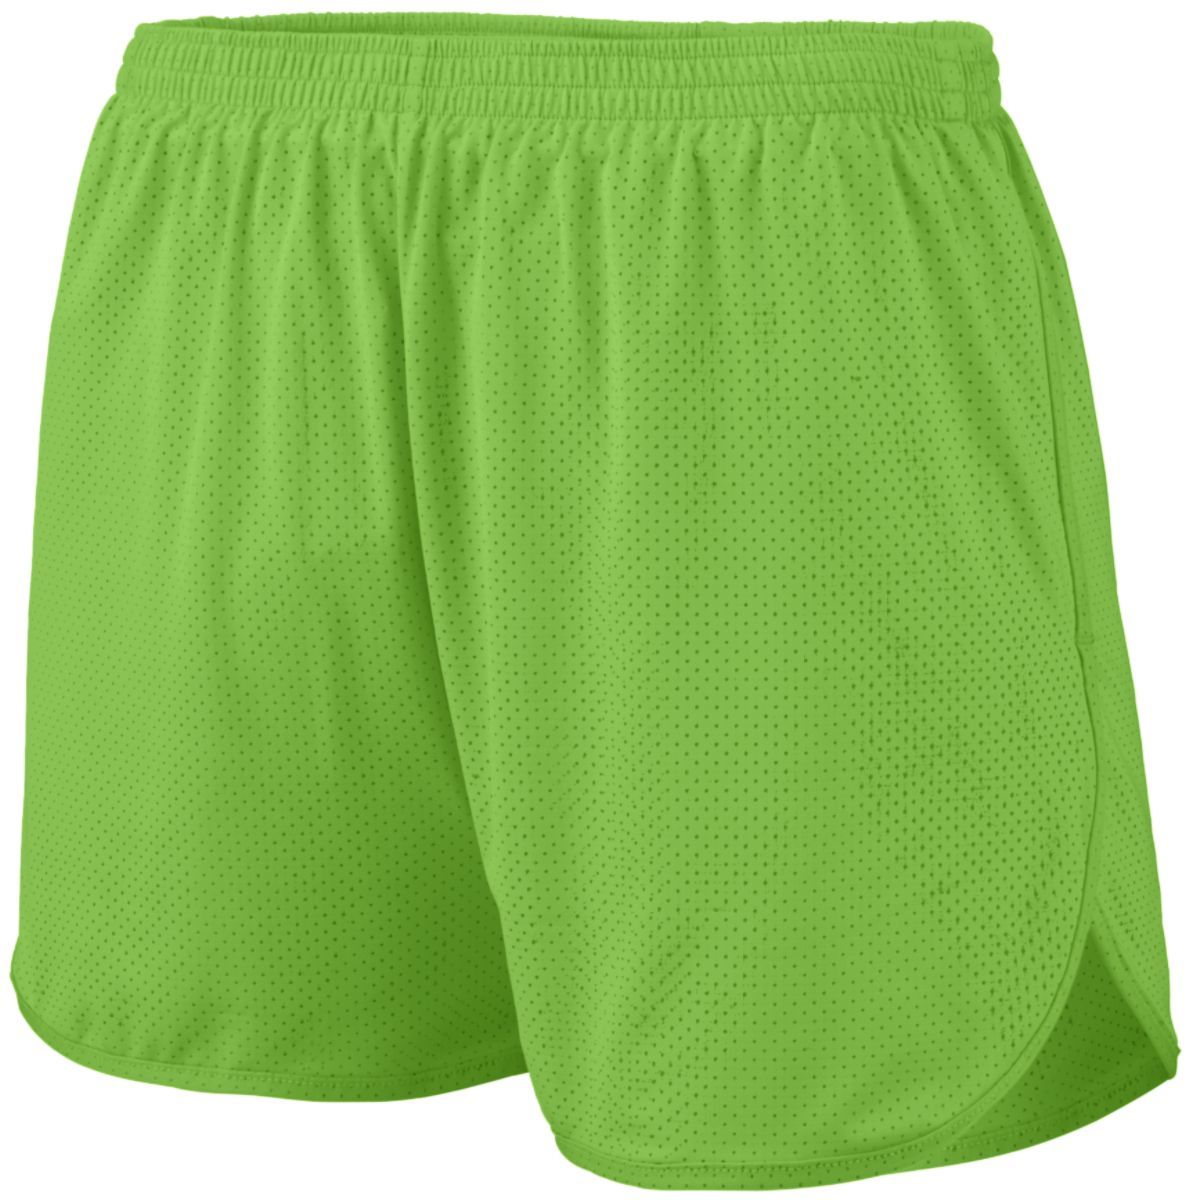 Augusta Sportswear Solid Split Shorts in Lime  -Part of the Adult, Adult-Shorts, Augusta-Products, Track-Field product lines at KanaleyCreations.com